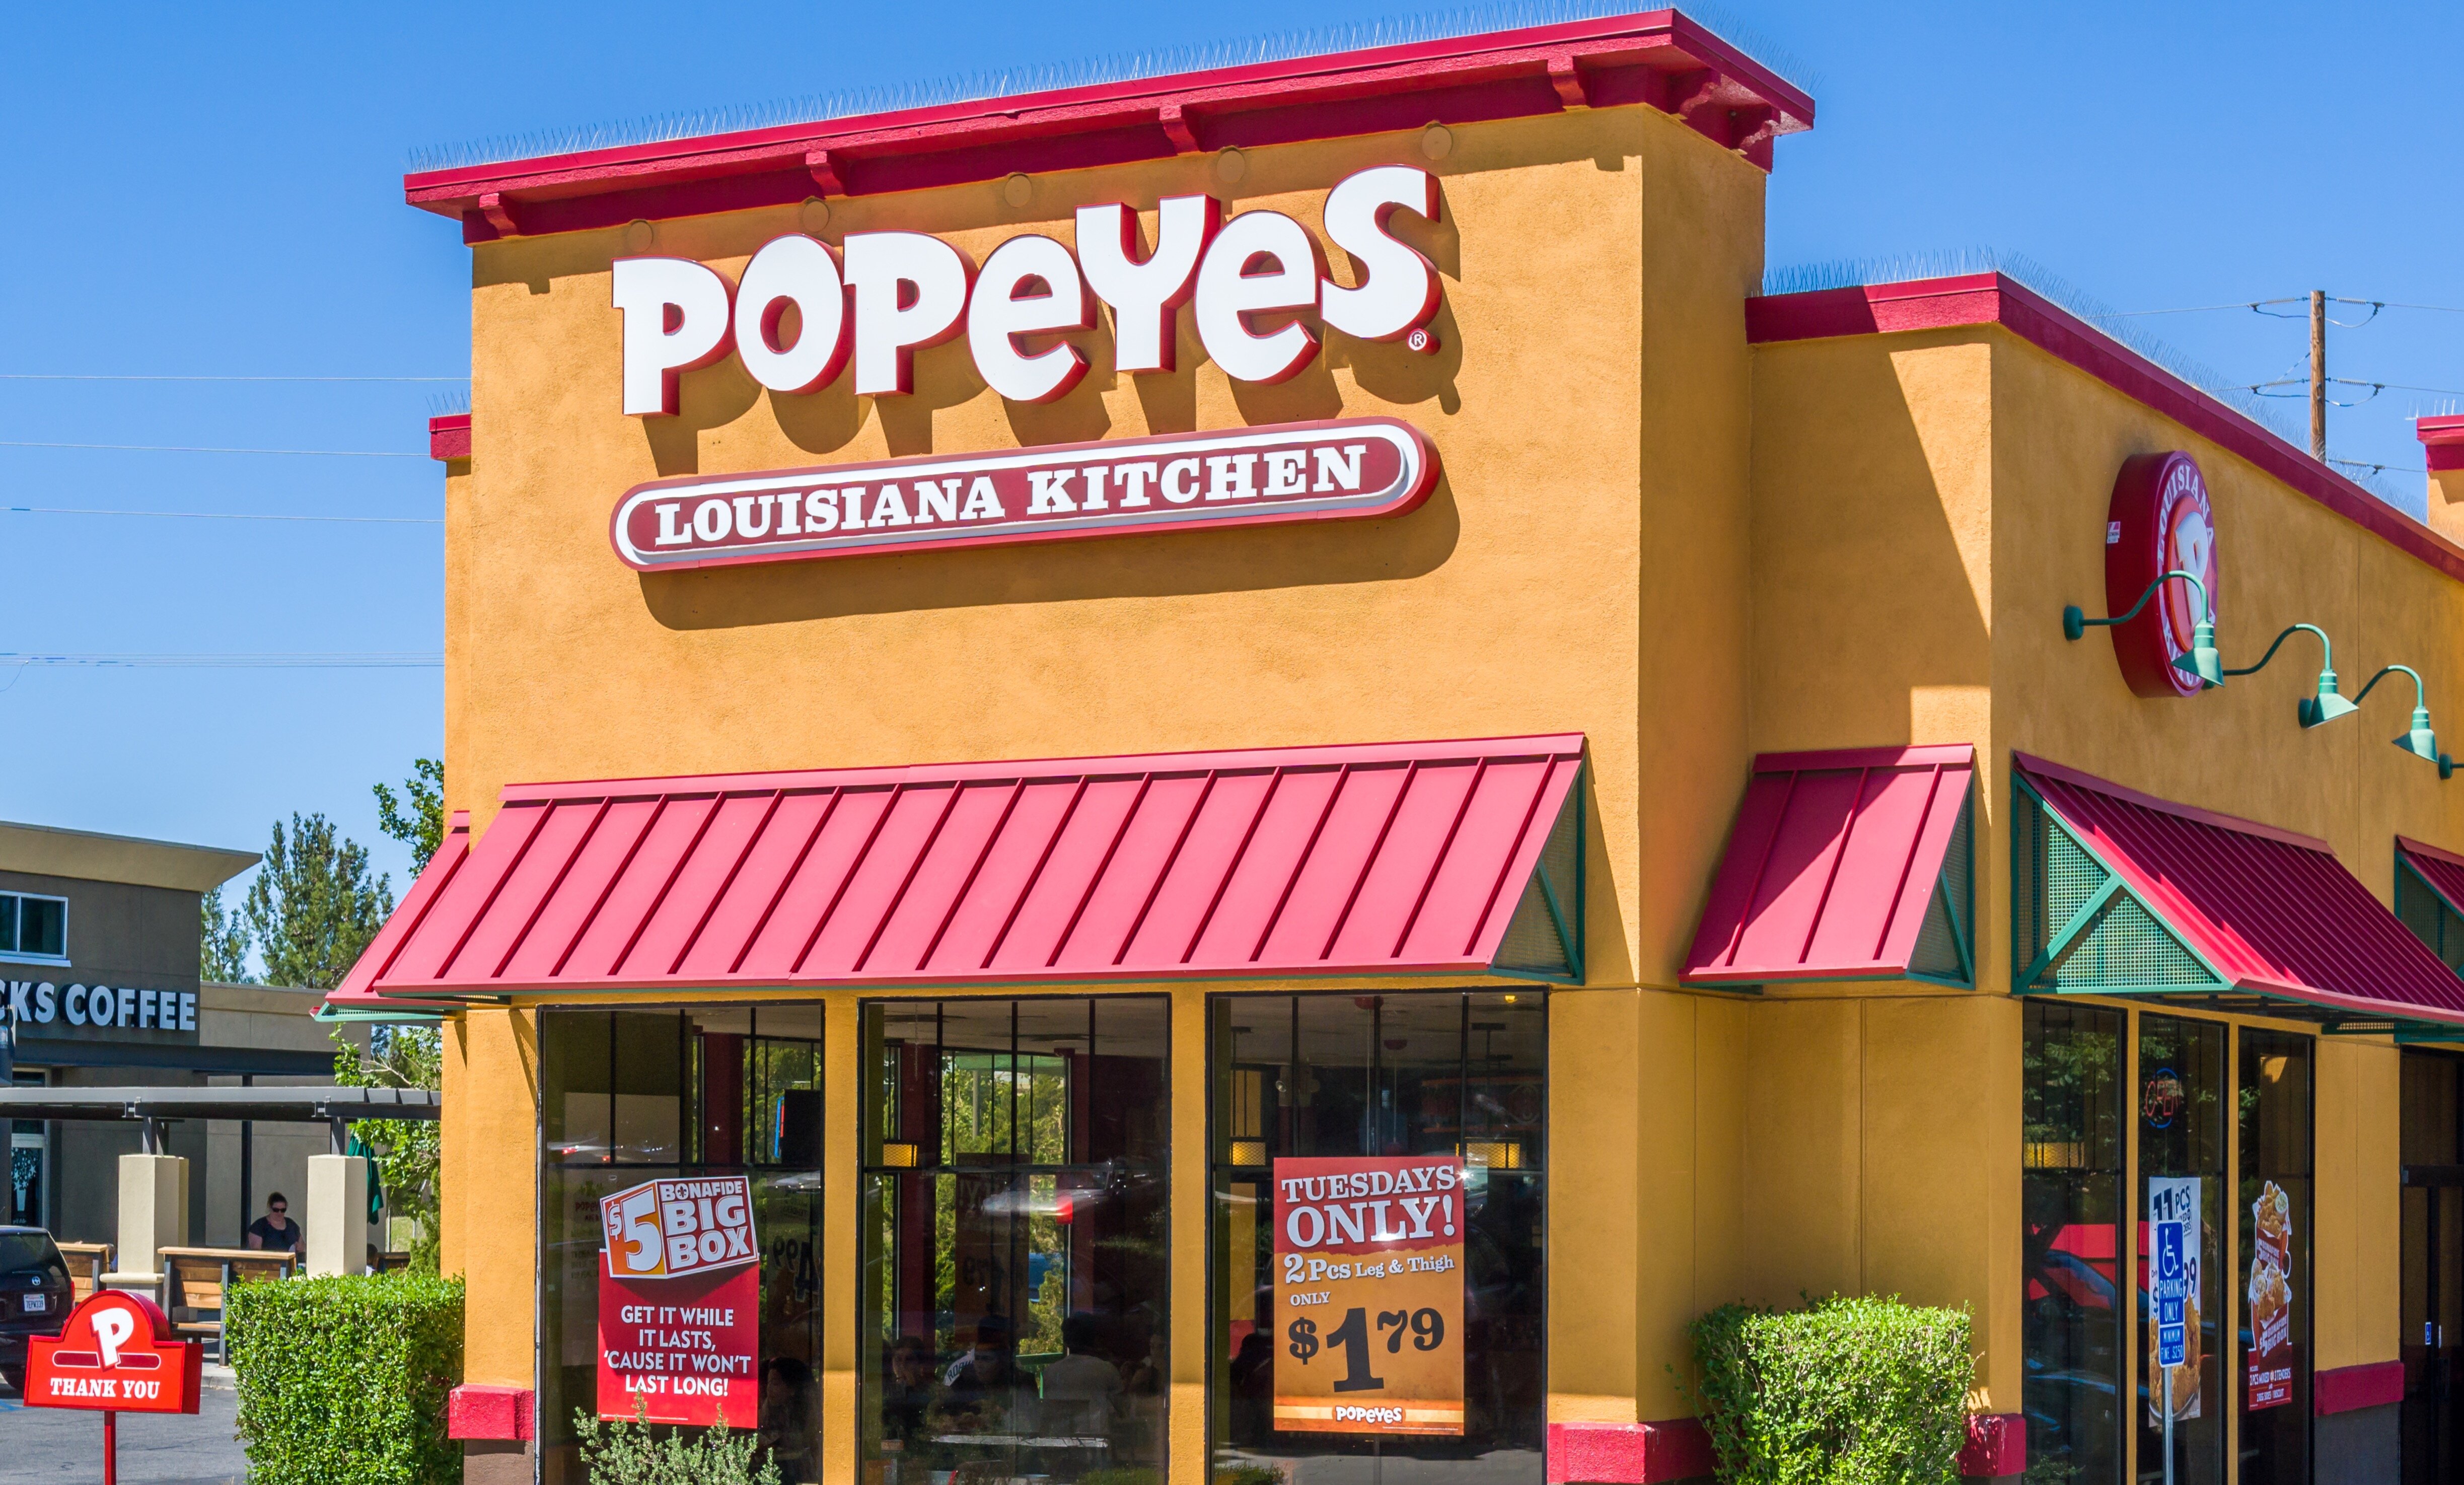 US chicken chain Popeyes plans openings in UK city centres and suburbs